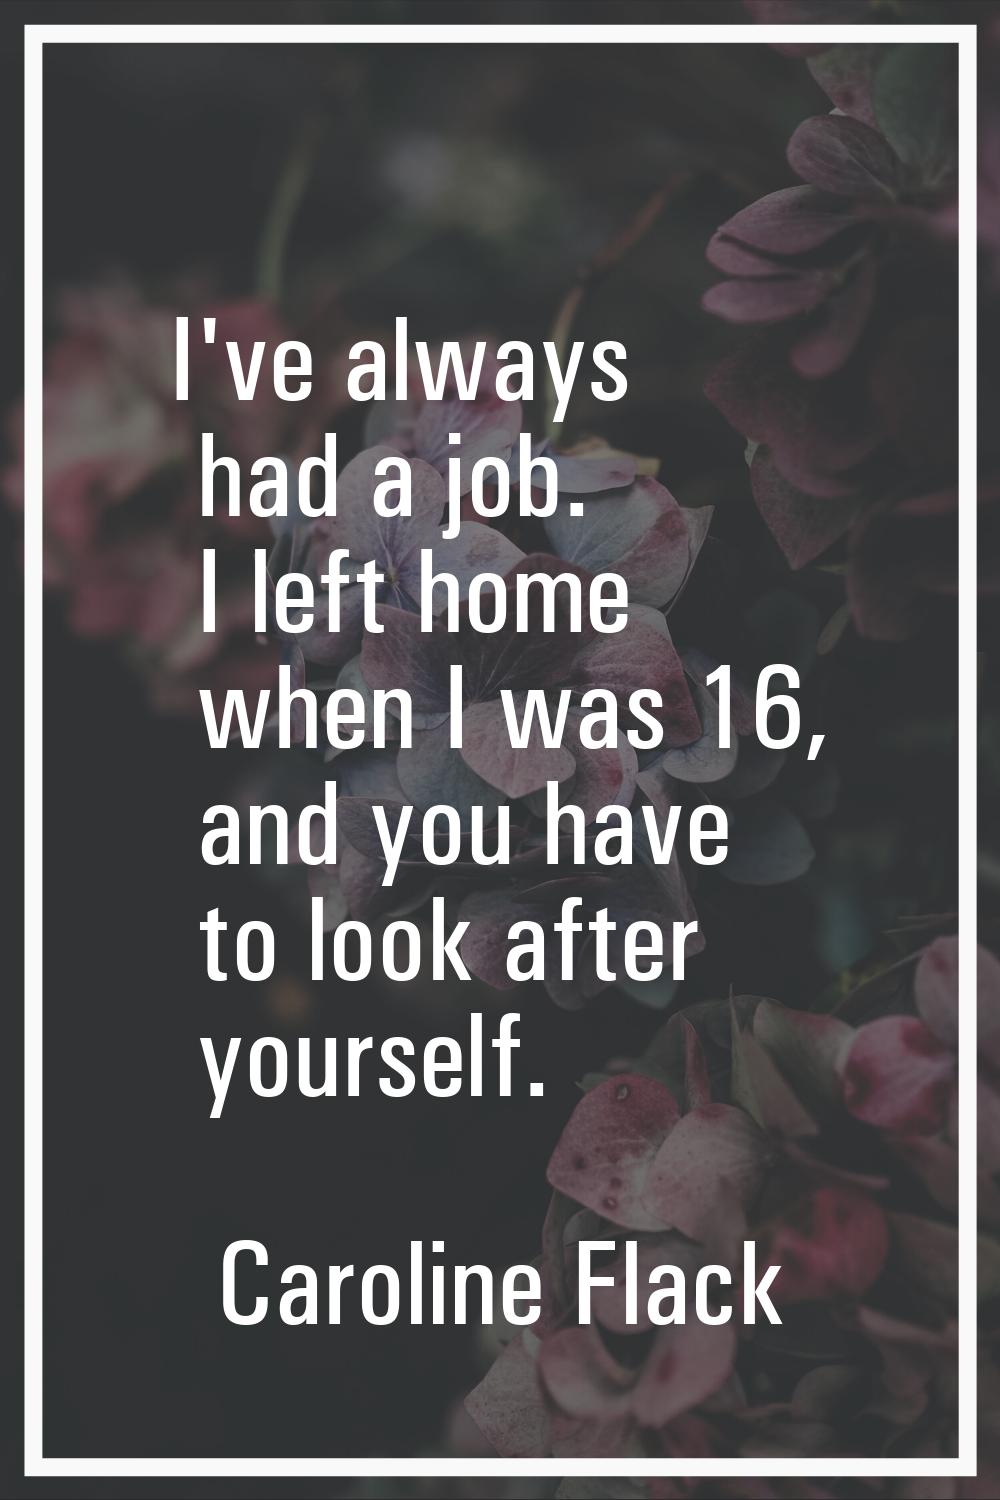 I've always had a job. I left home when I was 16, and you have to look after yourself.